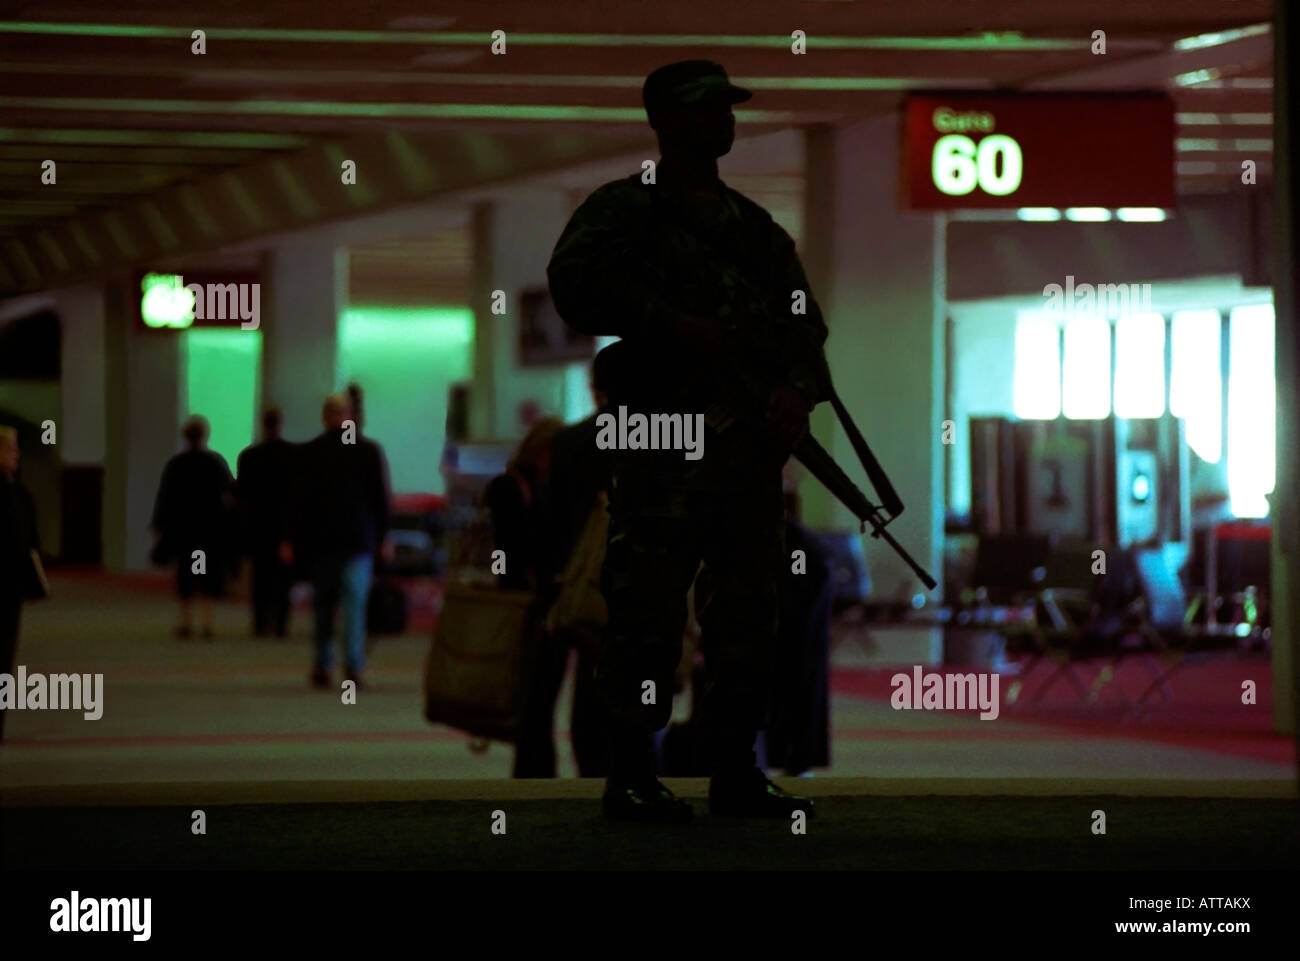 A California National Guard Soldier with an M16 Rifle stands at the concourse entrance at San Francisco International Airport. Stock Photo